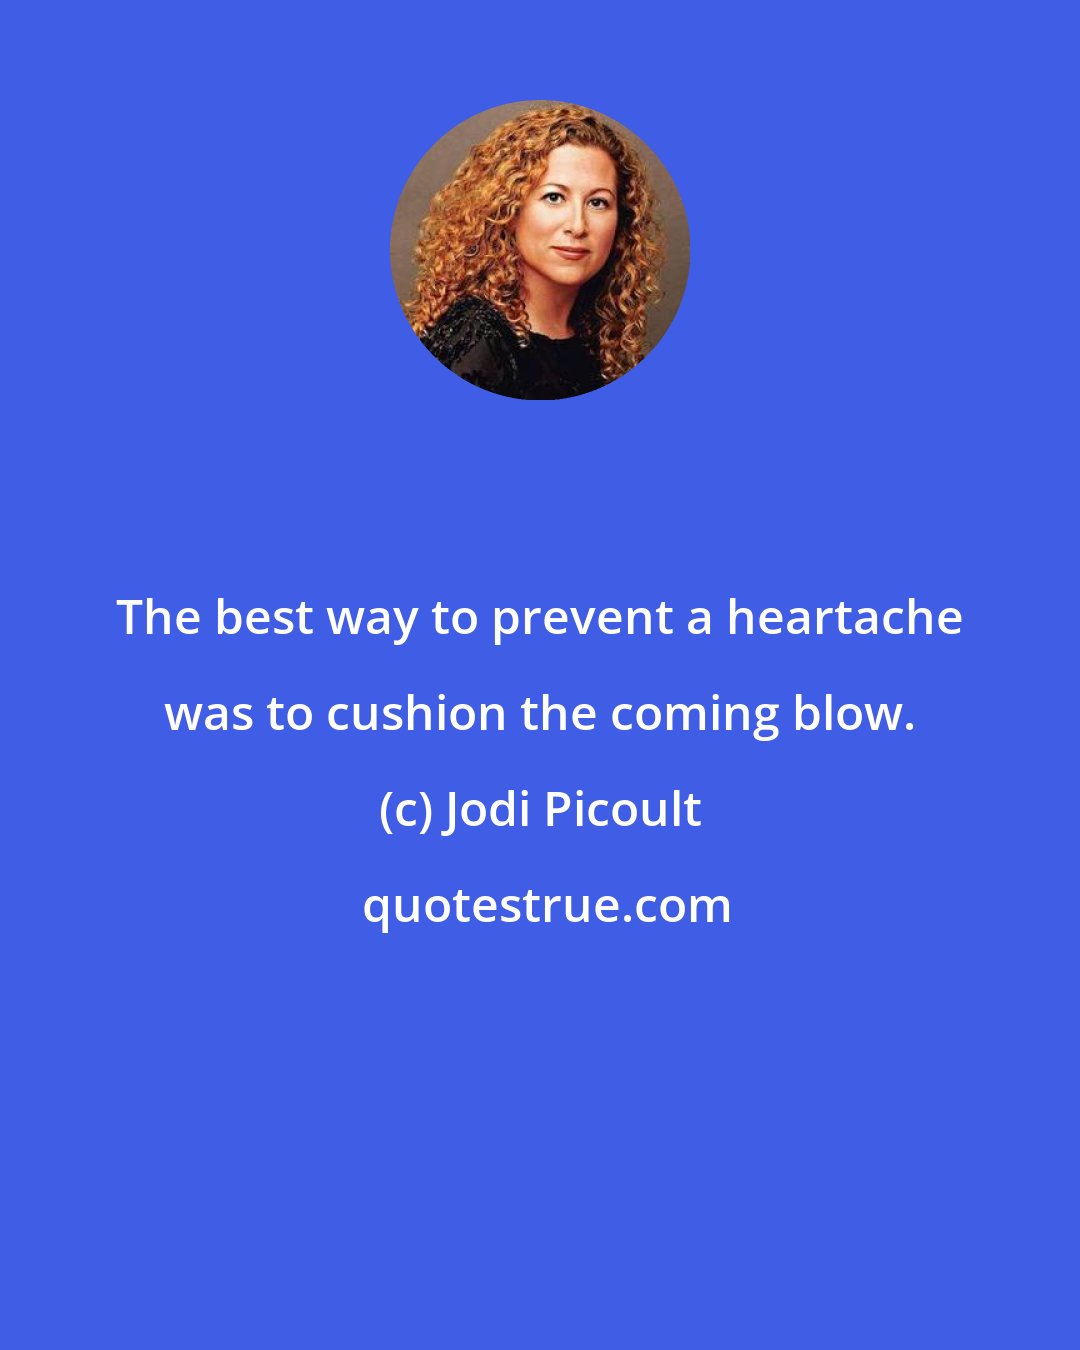 Jodi Picoult: The best way to prevent a heartache was to cushion the coming blow.